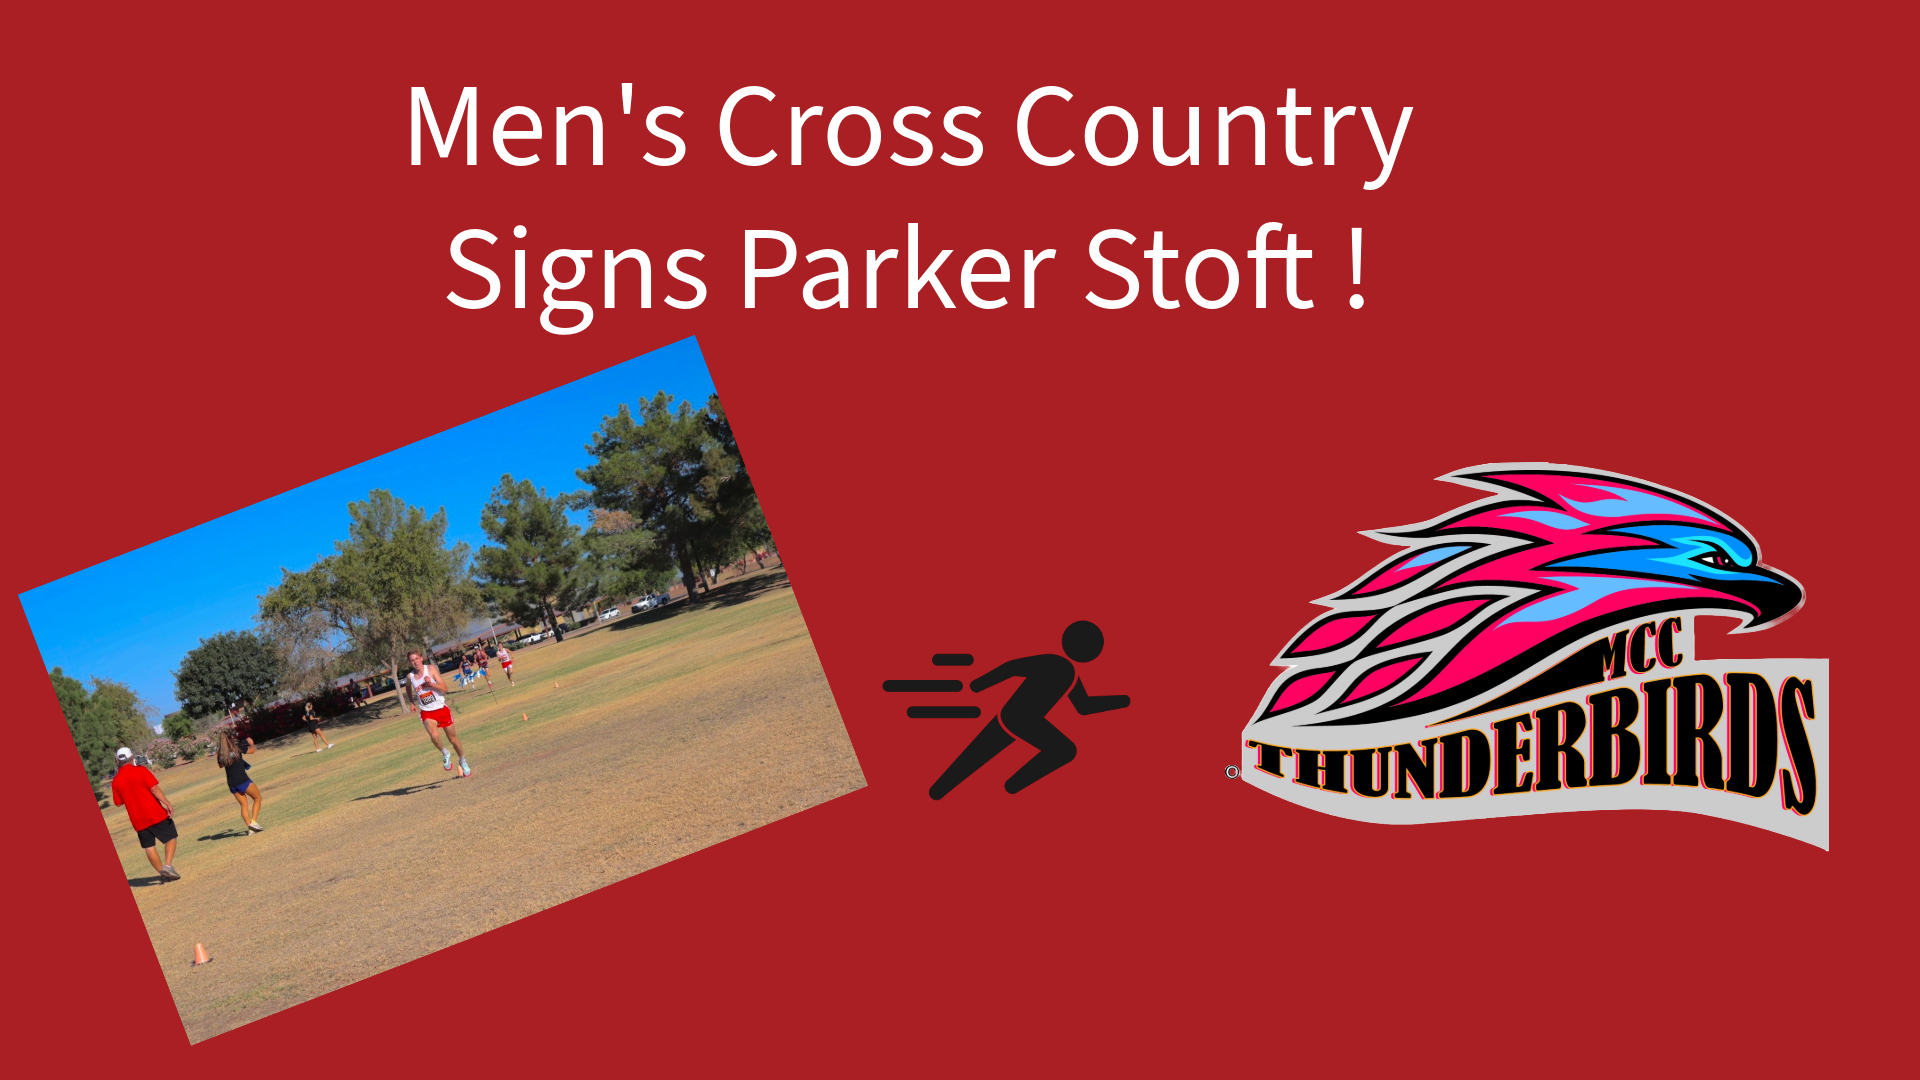 Men's Cross Country signs Parker Stoft